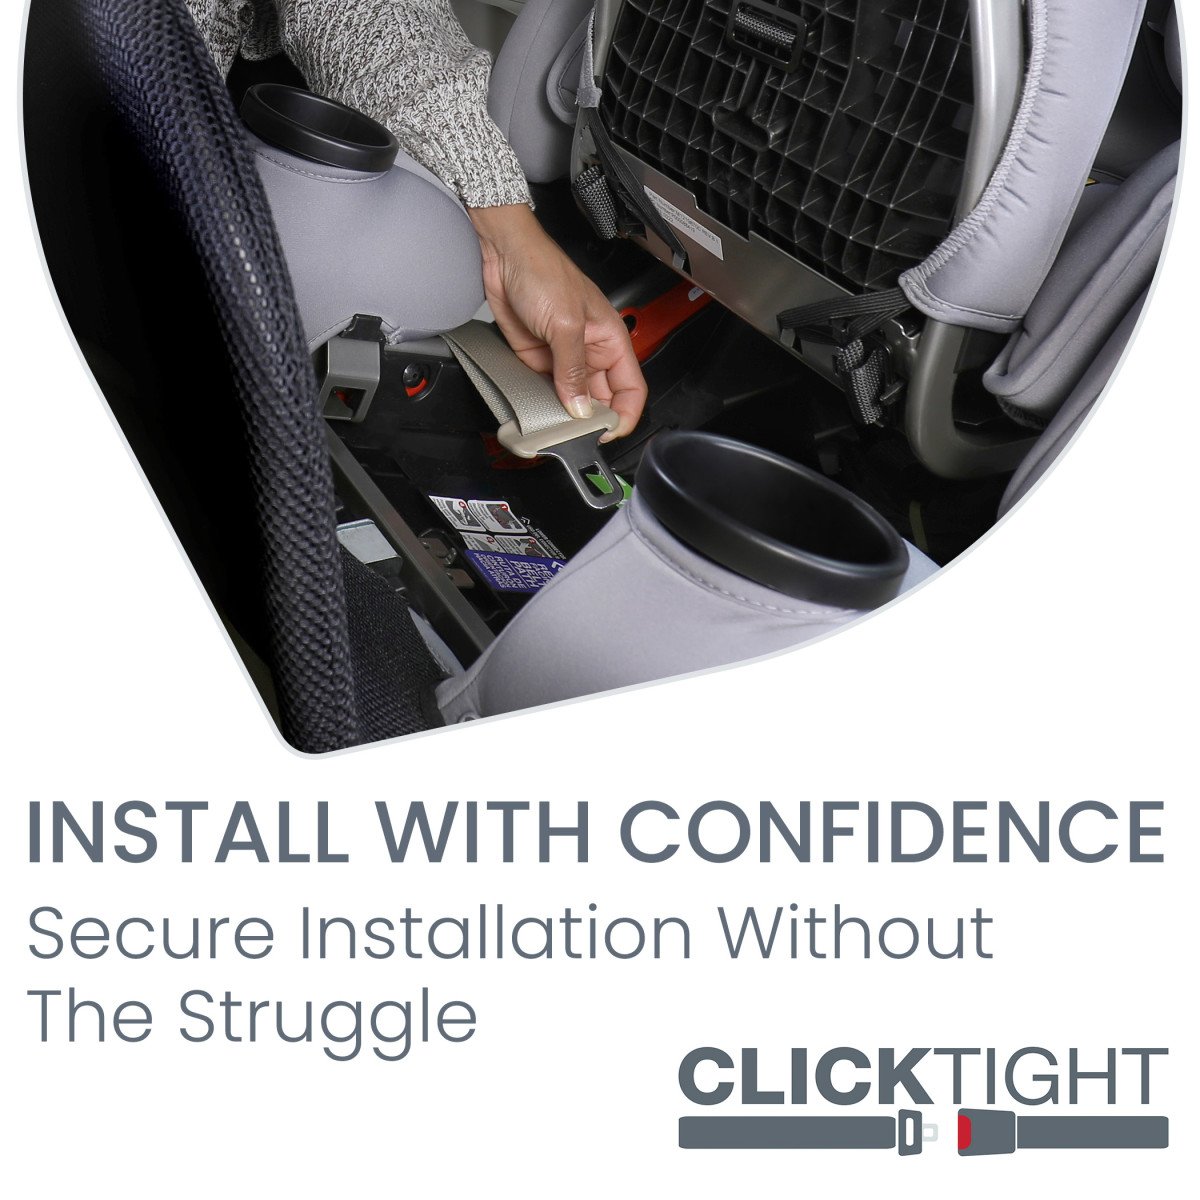 ClickTight Installation - Secure Installation Without the Struggle